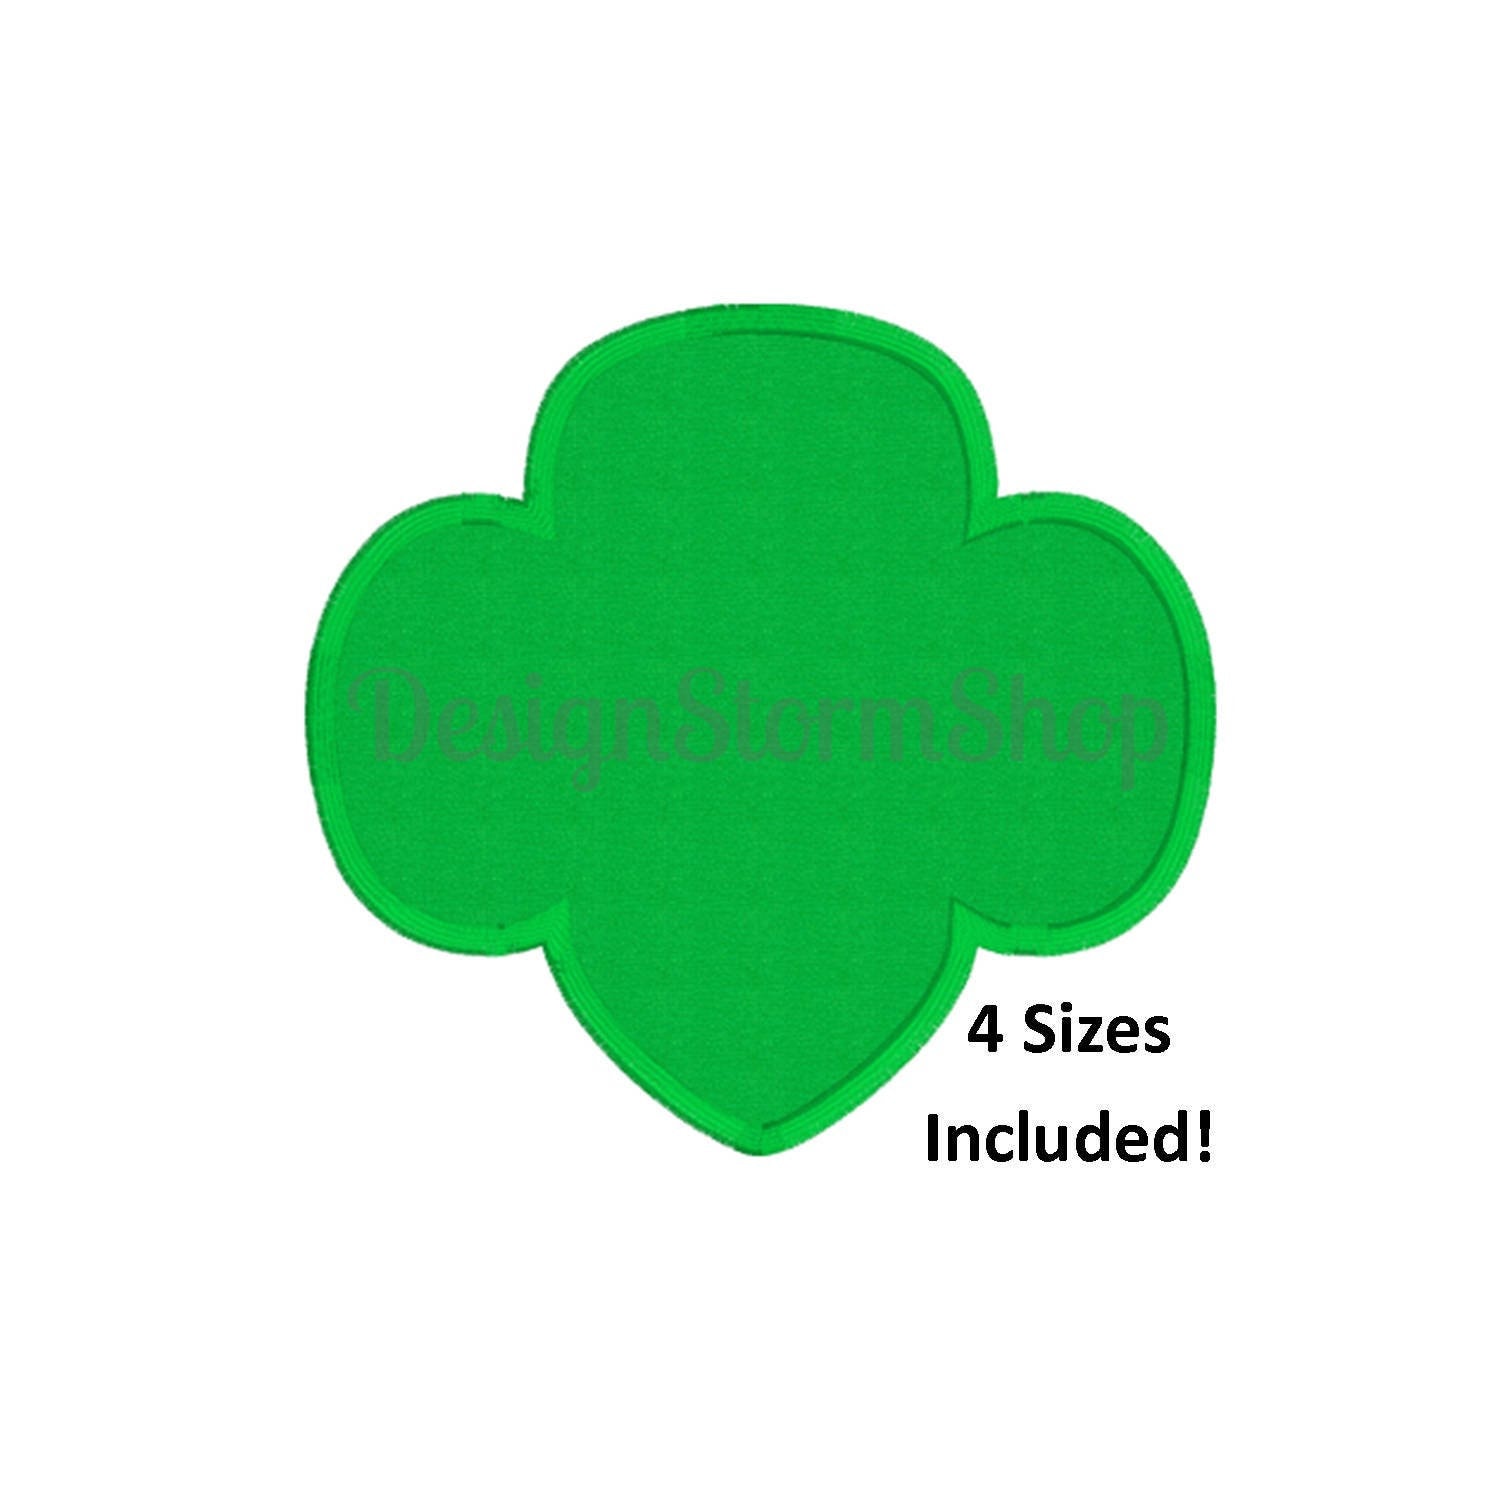 Girl Scout Patches Seamless Design File